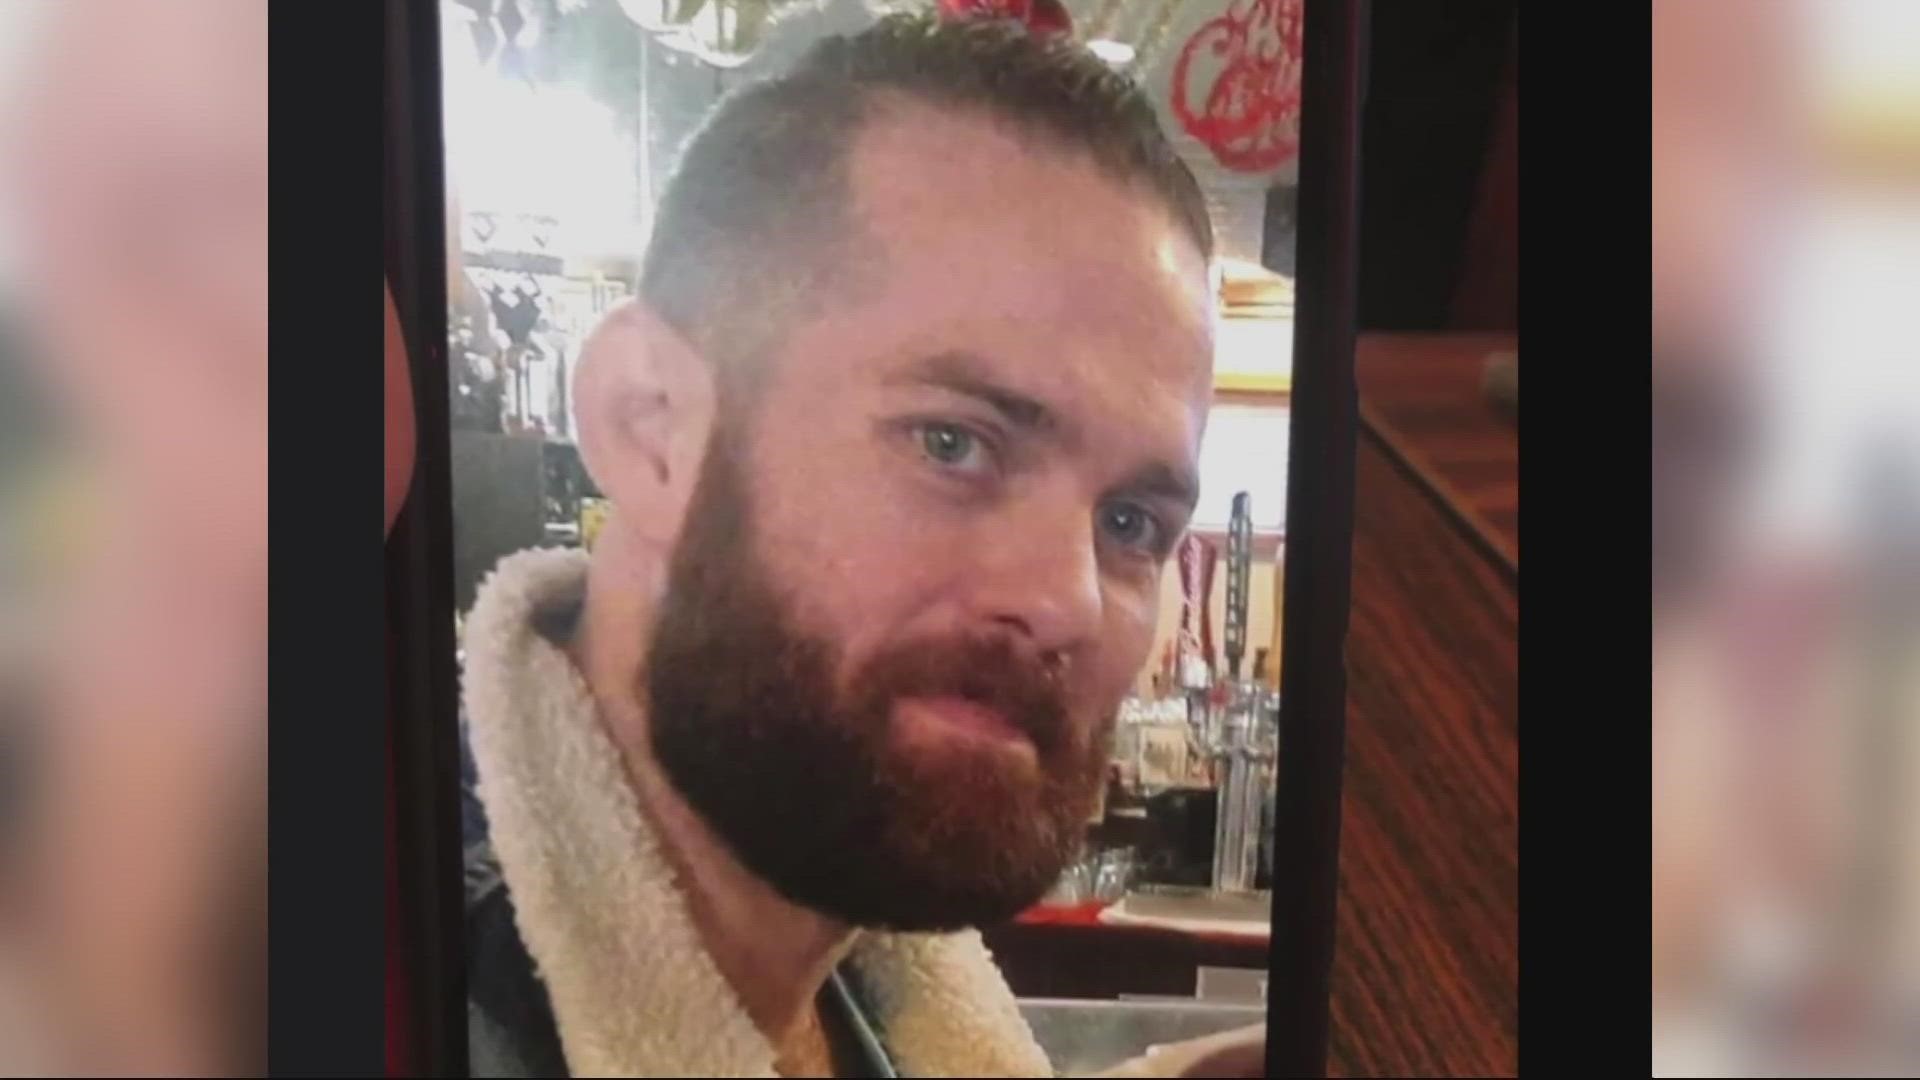 Grants Pass police said they think Benjamin Foster may be using dating apps to find victims. He's wanted after a woman was found bound and beaten last week.